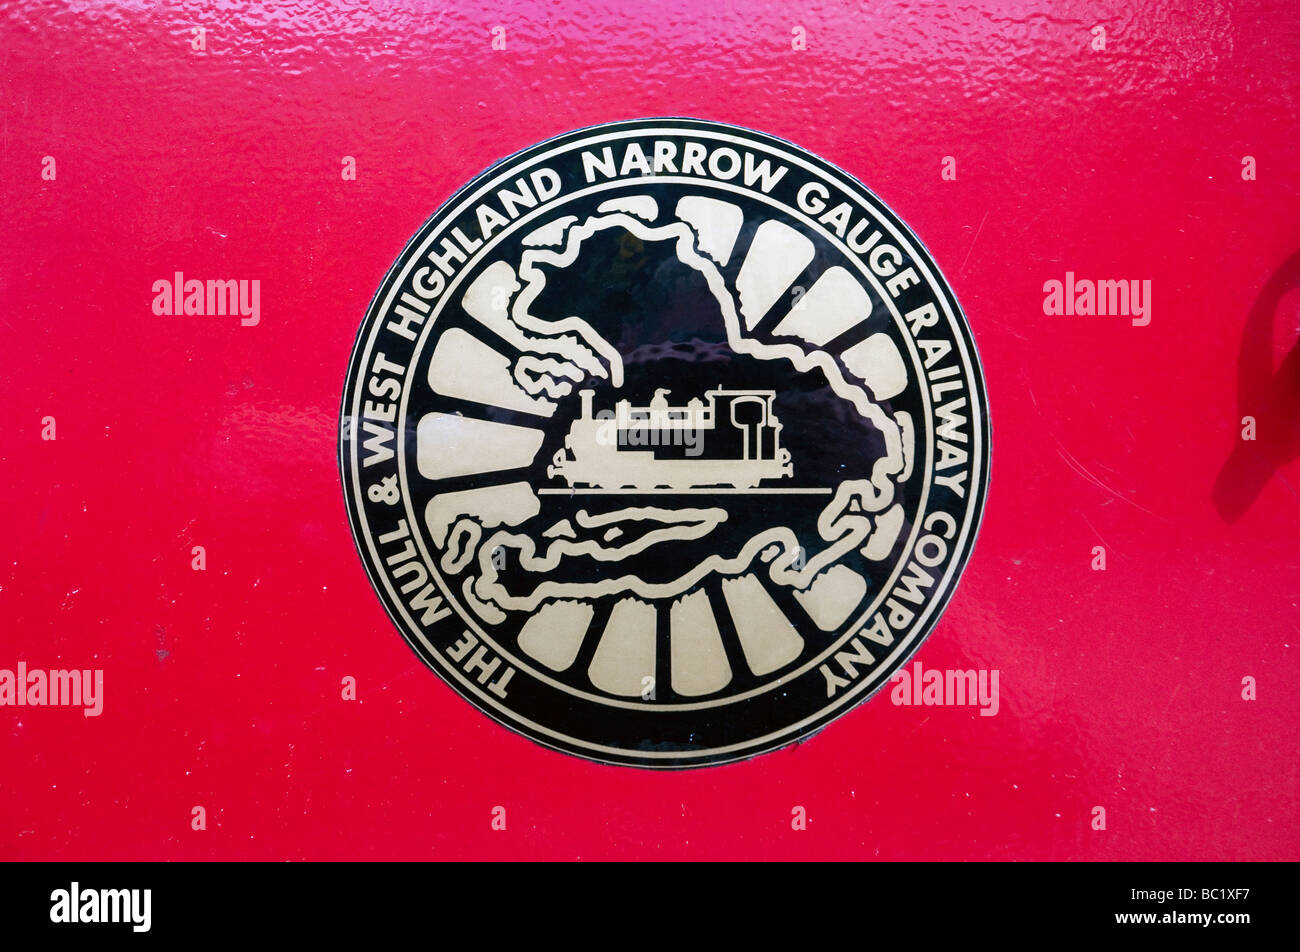 Railway Logo High Resolution Stock Photography And Images Alamy https www alamy com stock photo the mull and west highland narrow gauge railway logo craignure isle 24629003 html